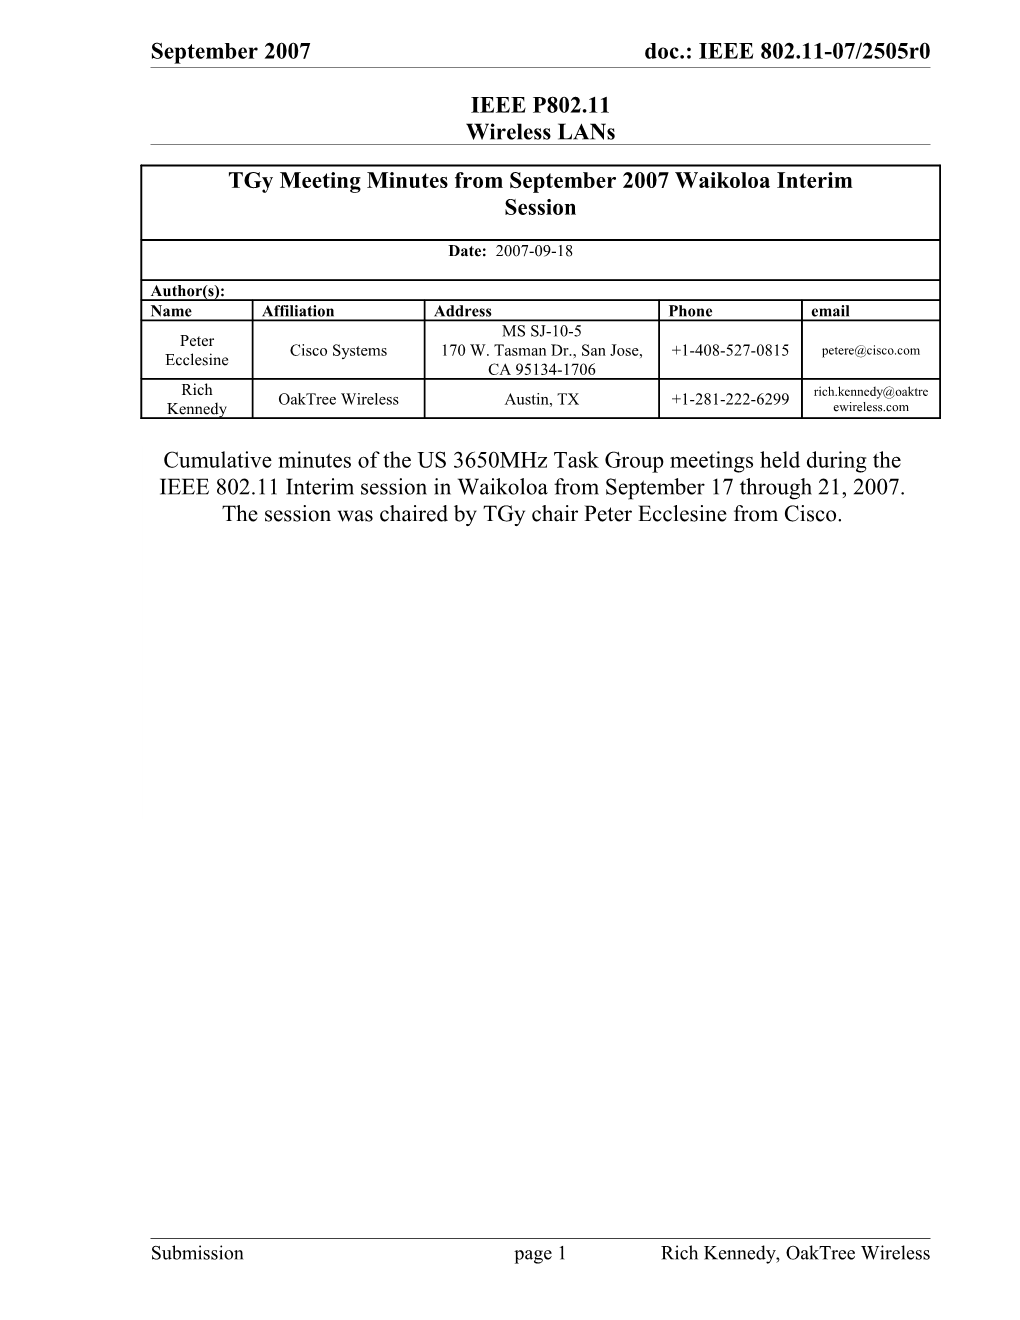 Tgy Meeting Minutes from September 2007 Waikoloa Interim Session